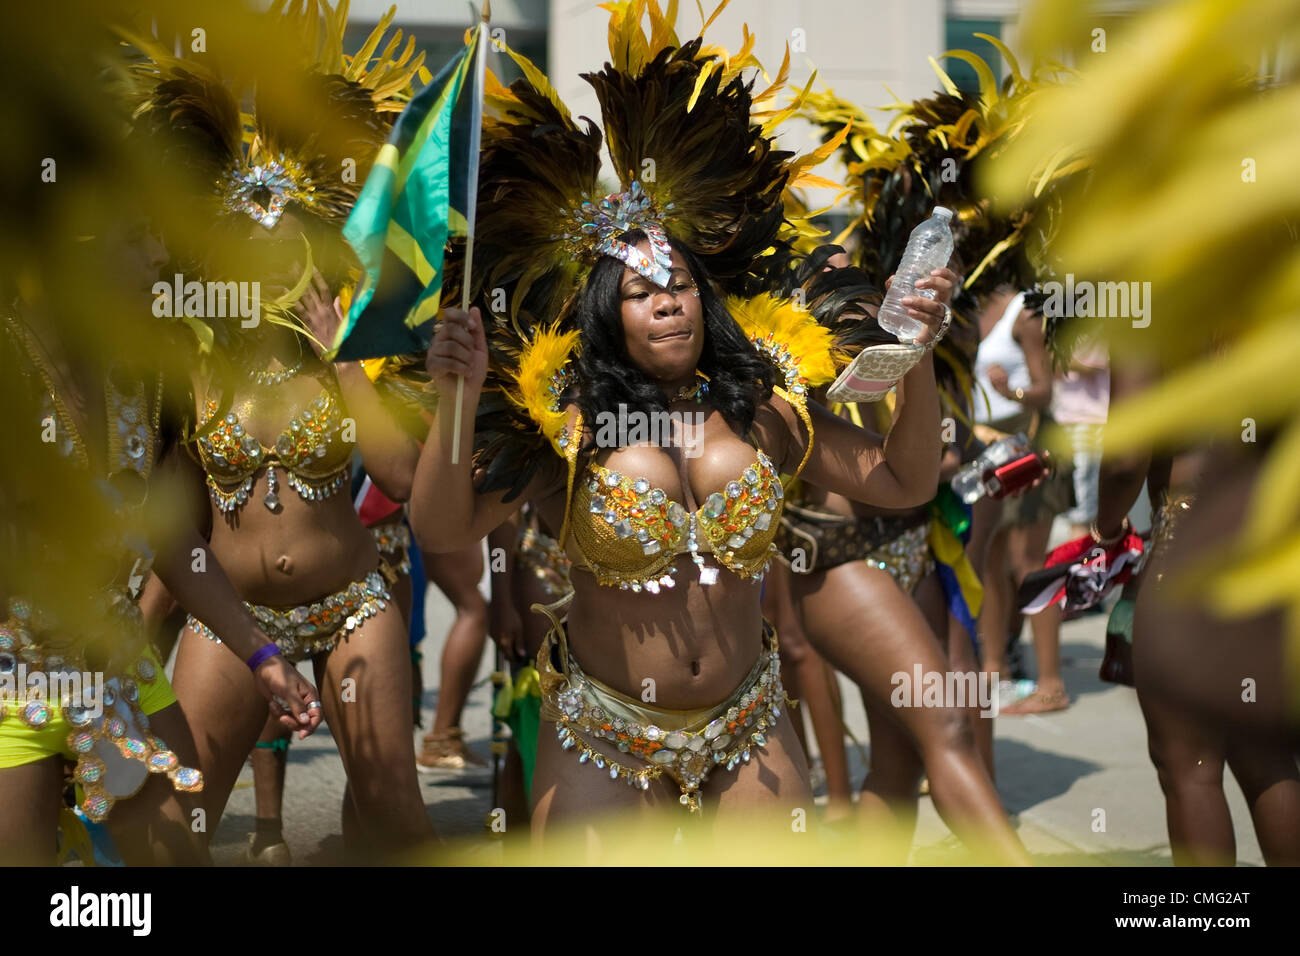 Toronto Ontario, Canada - August 4, 2012. The 47th annual Toronto Caribbean Carnival parade made its way down Lakeshore Avenue on a very hot August day. Formerly known as Caribbana, masqueraders in feather and sequined costumes entertained the crowd who lined the parade route. Stock Photo